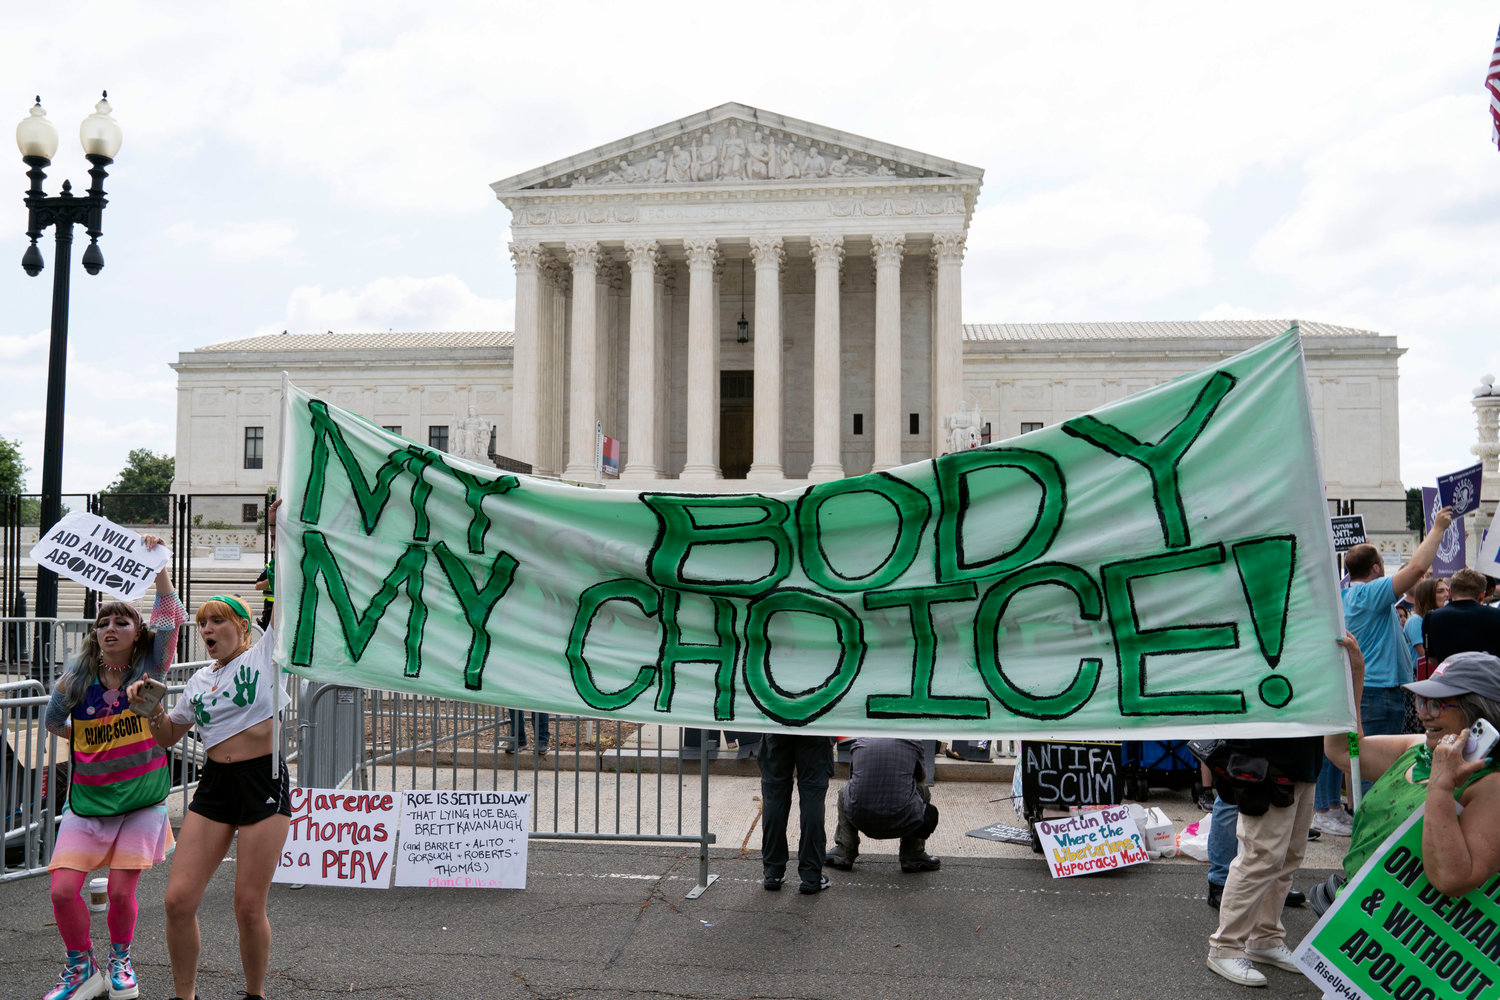 Abortion right activists gather outside the Supreme Court in Washington, Friday, June 24, 2022. The Supreme Court has ended constitutional protections for abortion that had been in place nearly 50 years, a decision by its conservative majority to overturn the court's landmark abortion cases. (AP Photo/Jose Luis Magana)